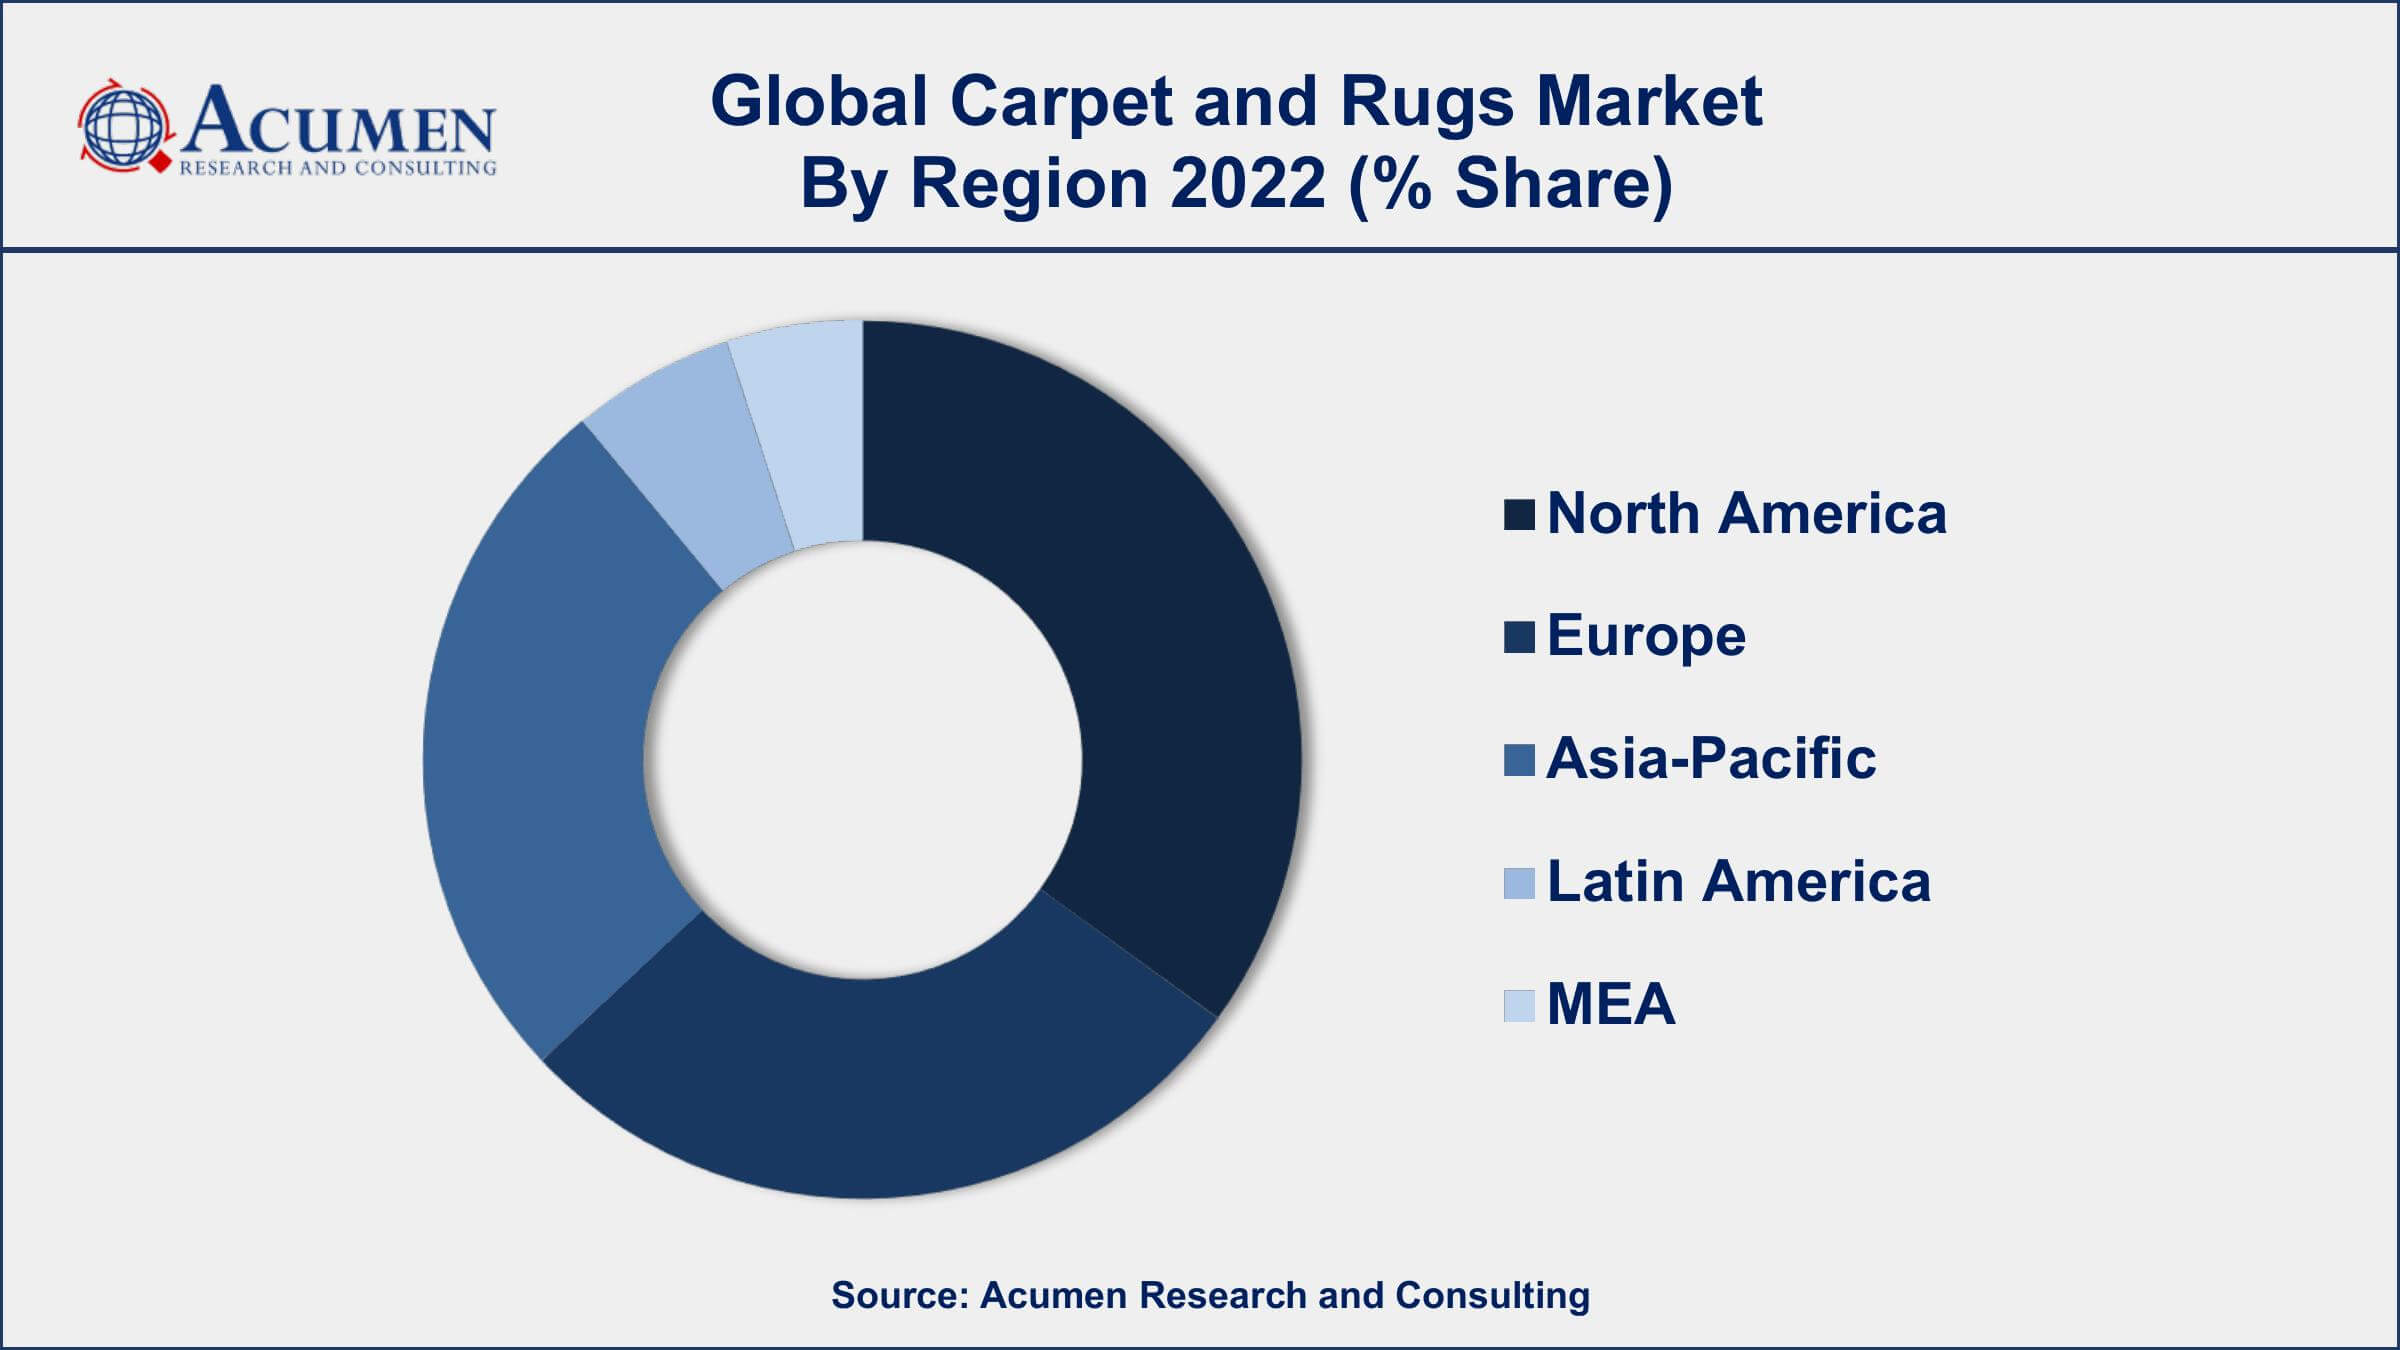 Carpet and Rugs Market Dynamics